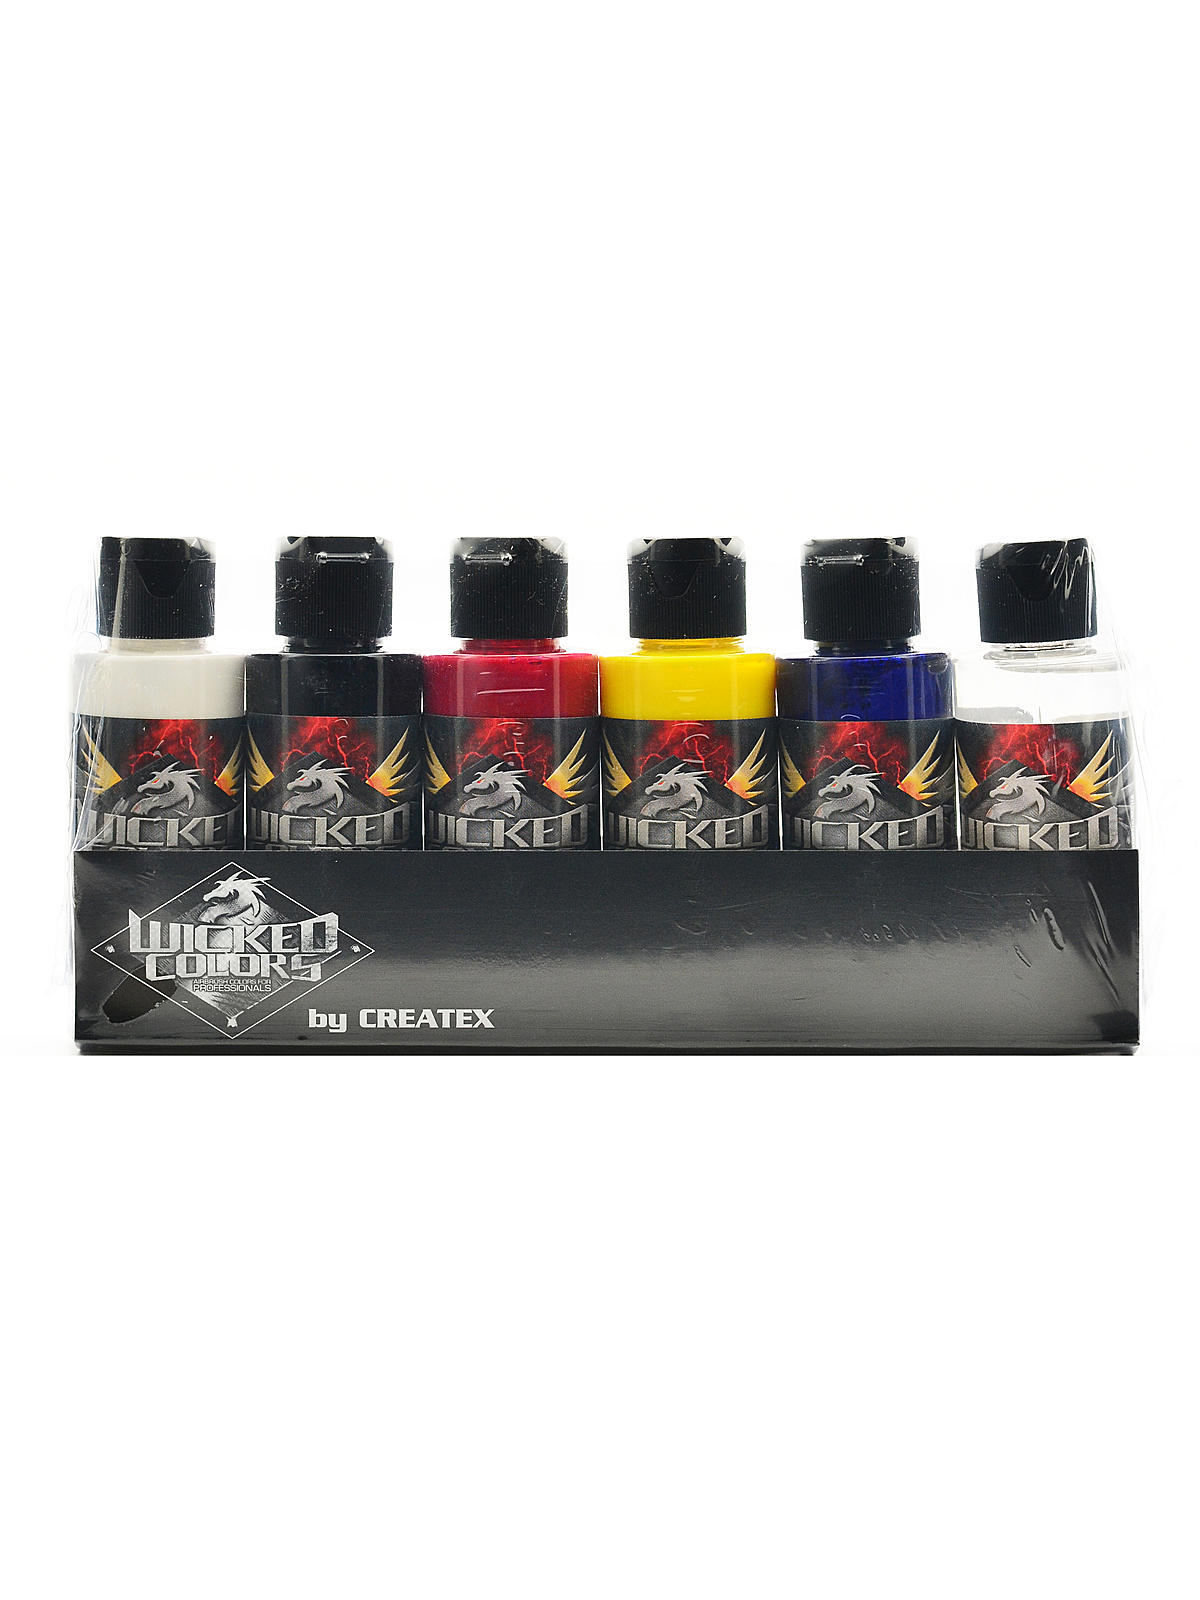 Wicked Airbrush Color Sets Detail Primary Set 2 Oz. Set Of 6